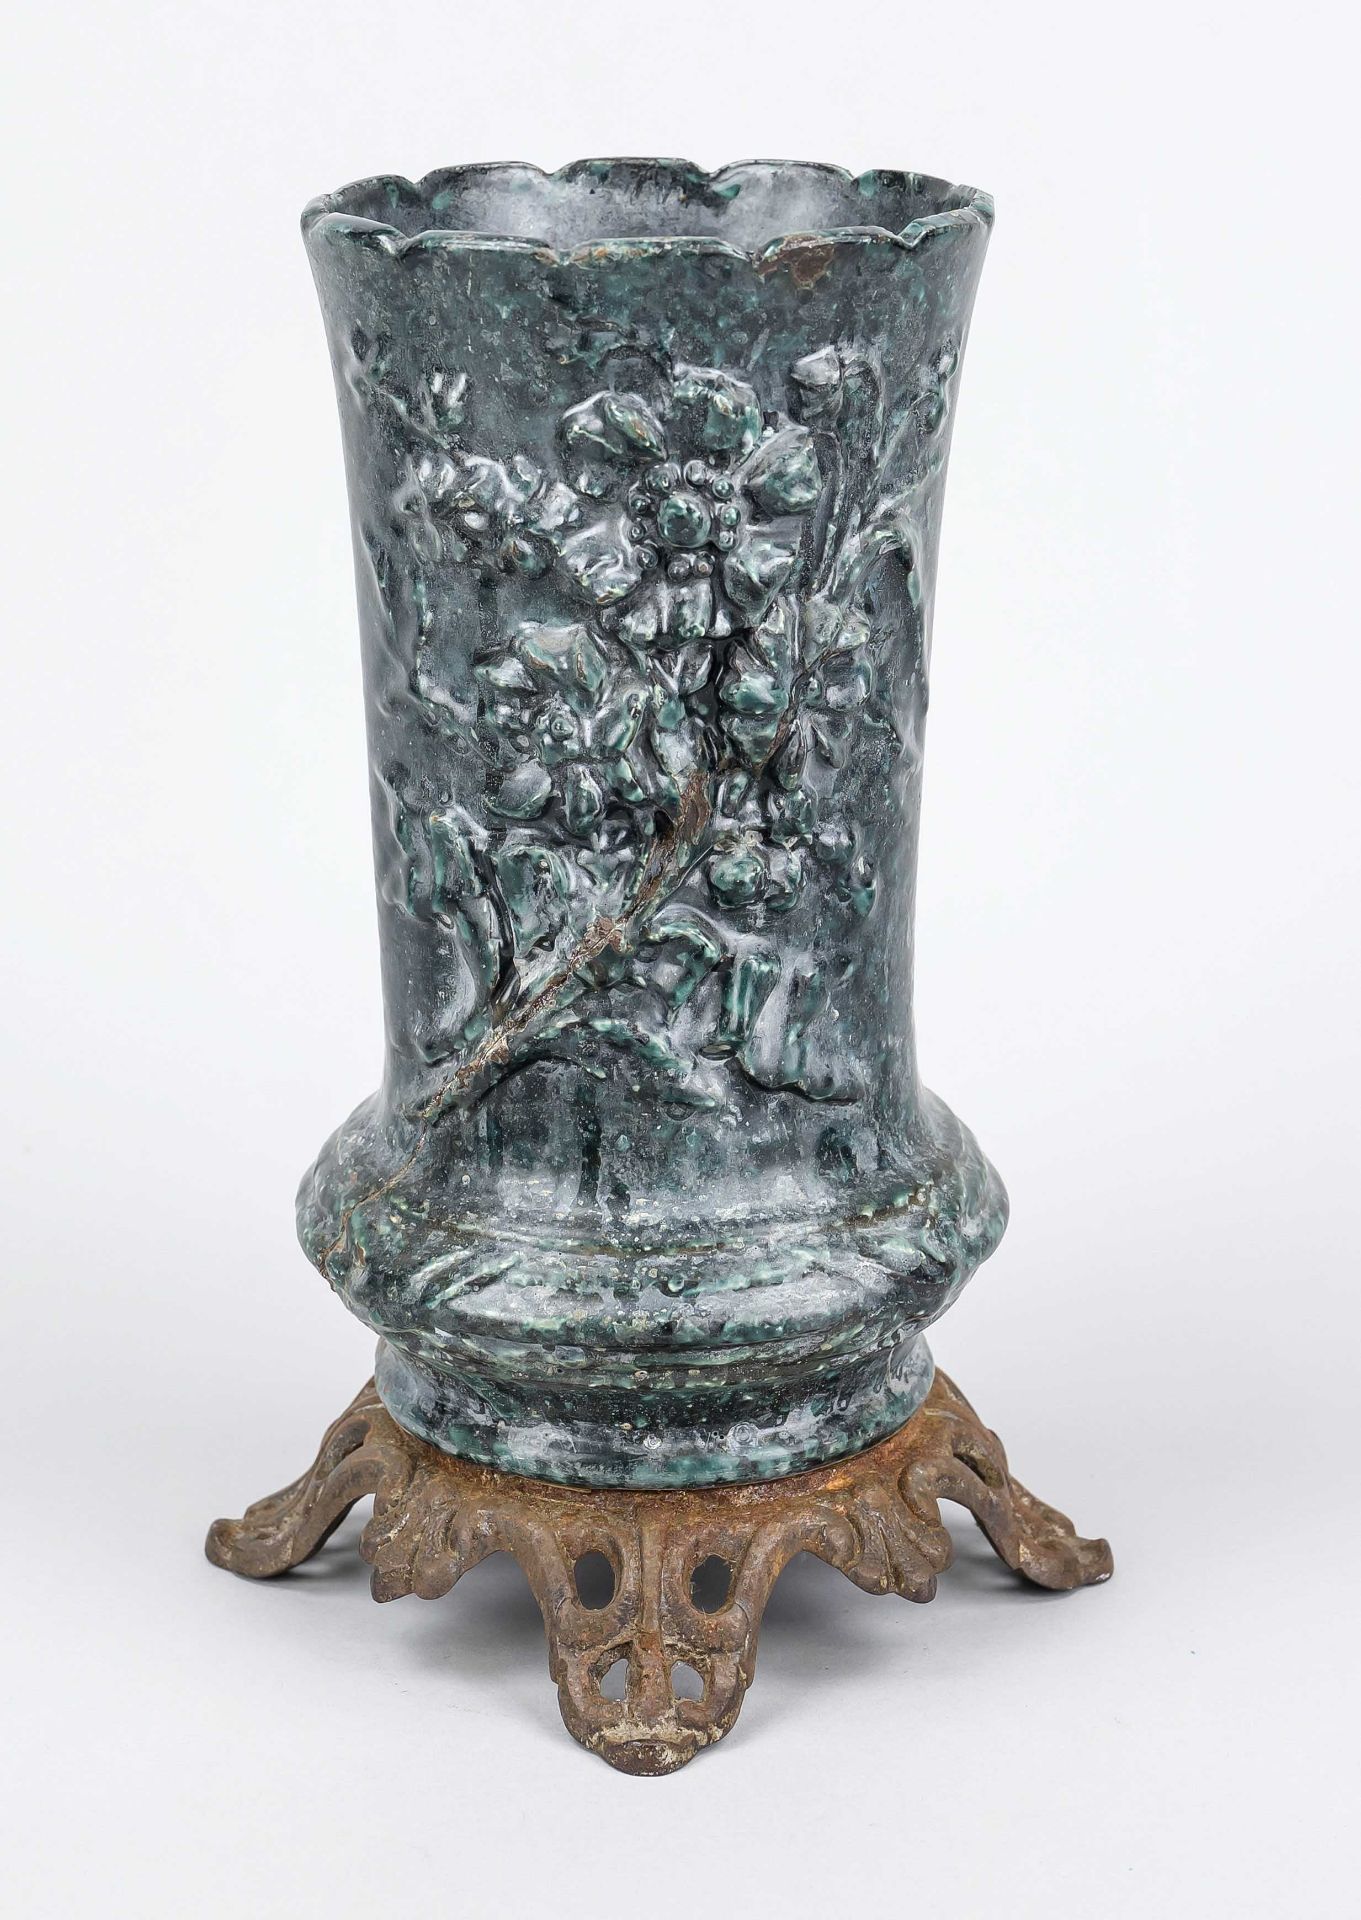 Enameled iron vase, probably Belgium/France, late 19th century, glazed in monochrome green on all